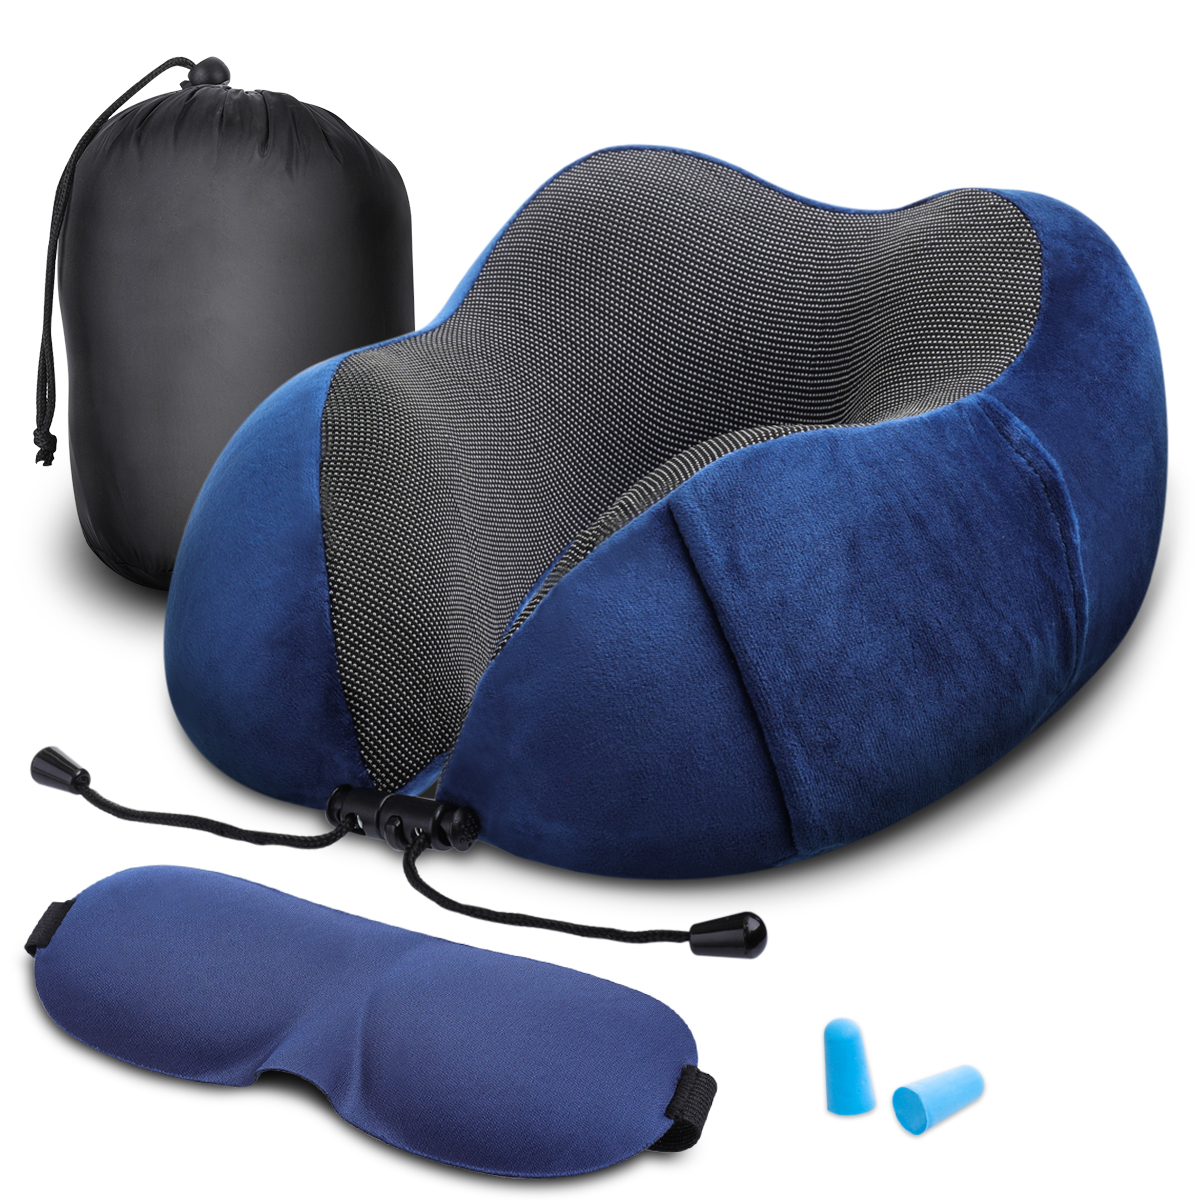 Audew Travel Pillow for Airplanes Head Support Pillow 100% Pure Memory Foam Neck Pillow Soft Sleeping Rest Cushion Airplane Travel Kit with Sleep Eye Mask and Earplugs 